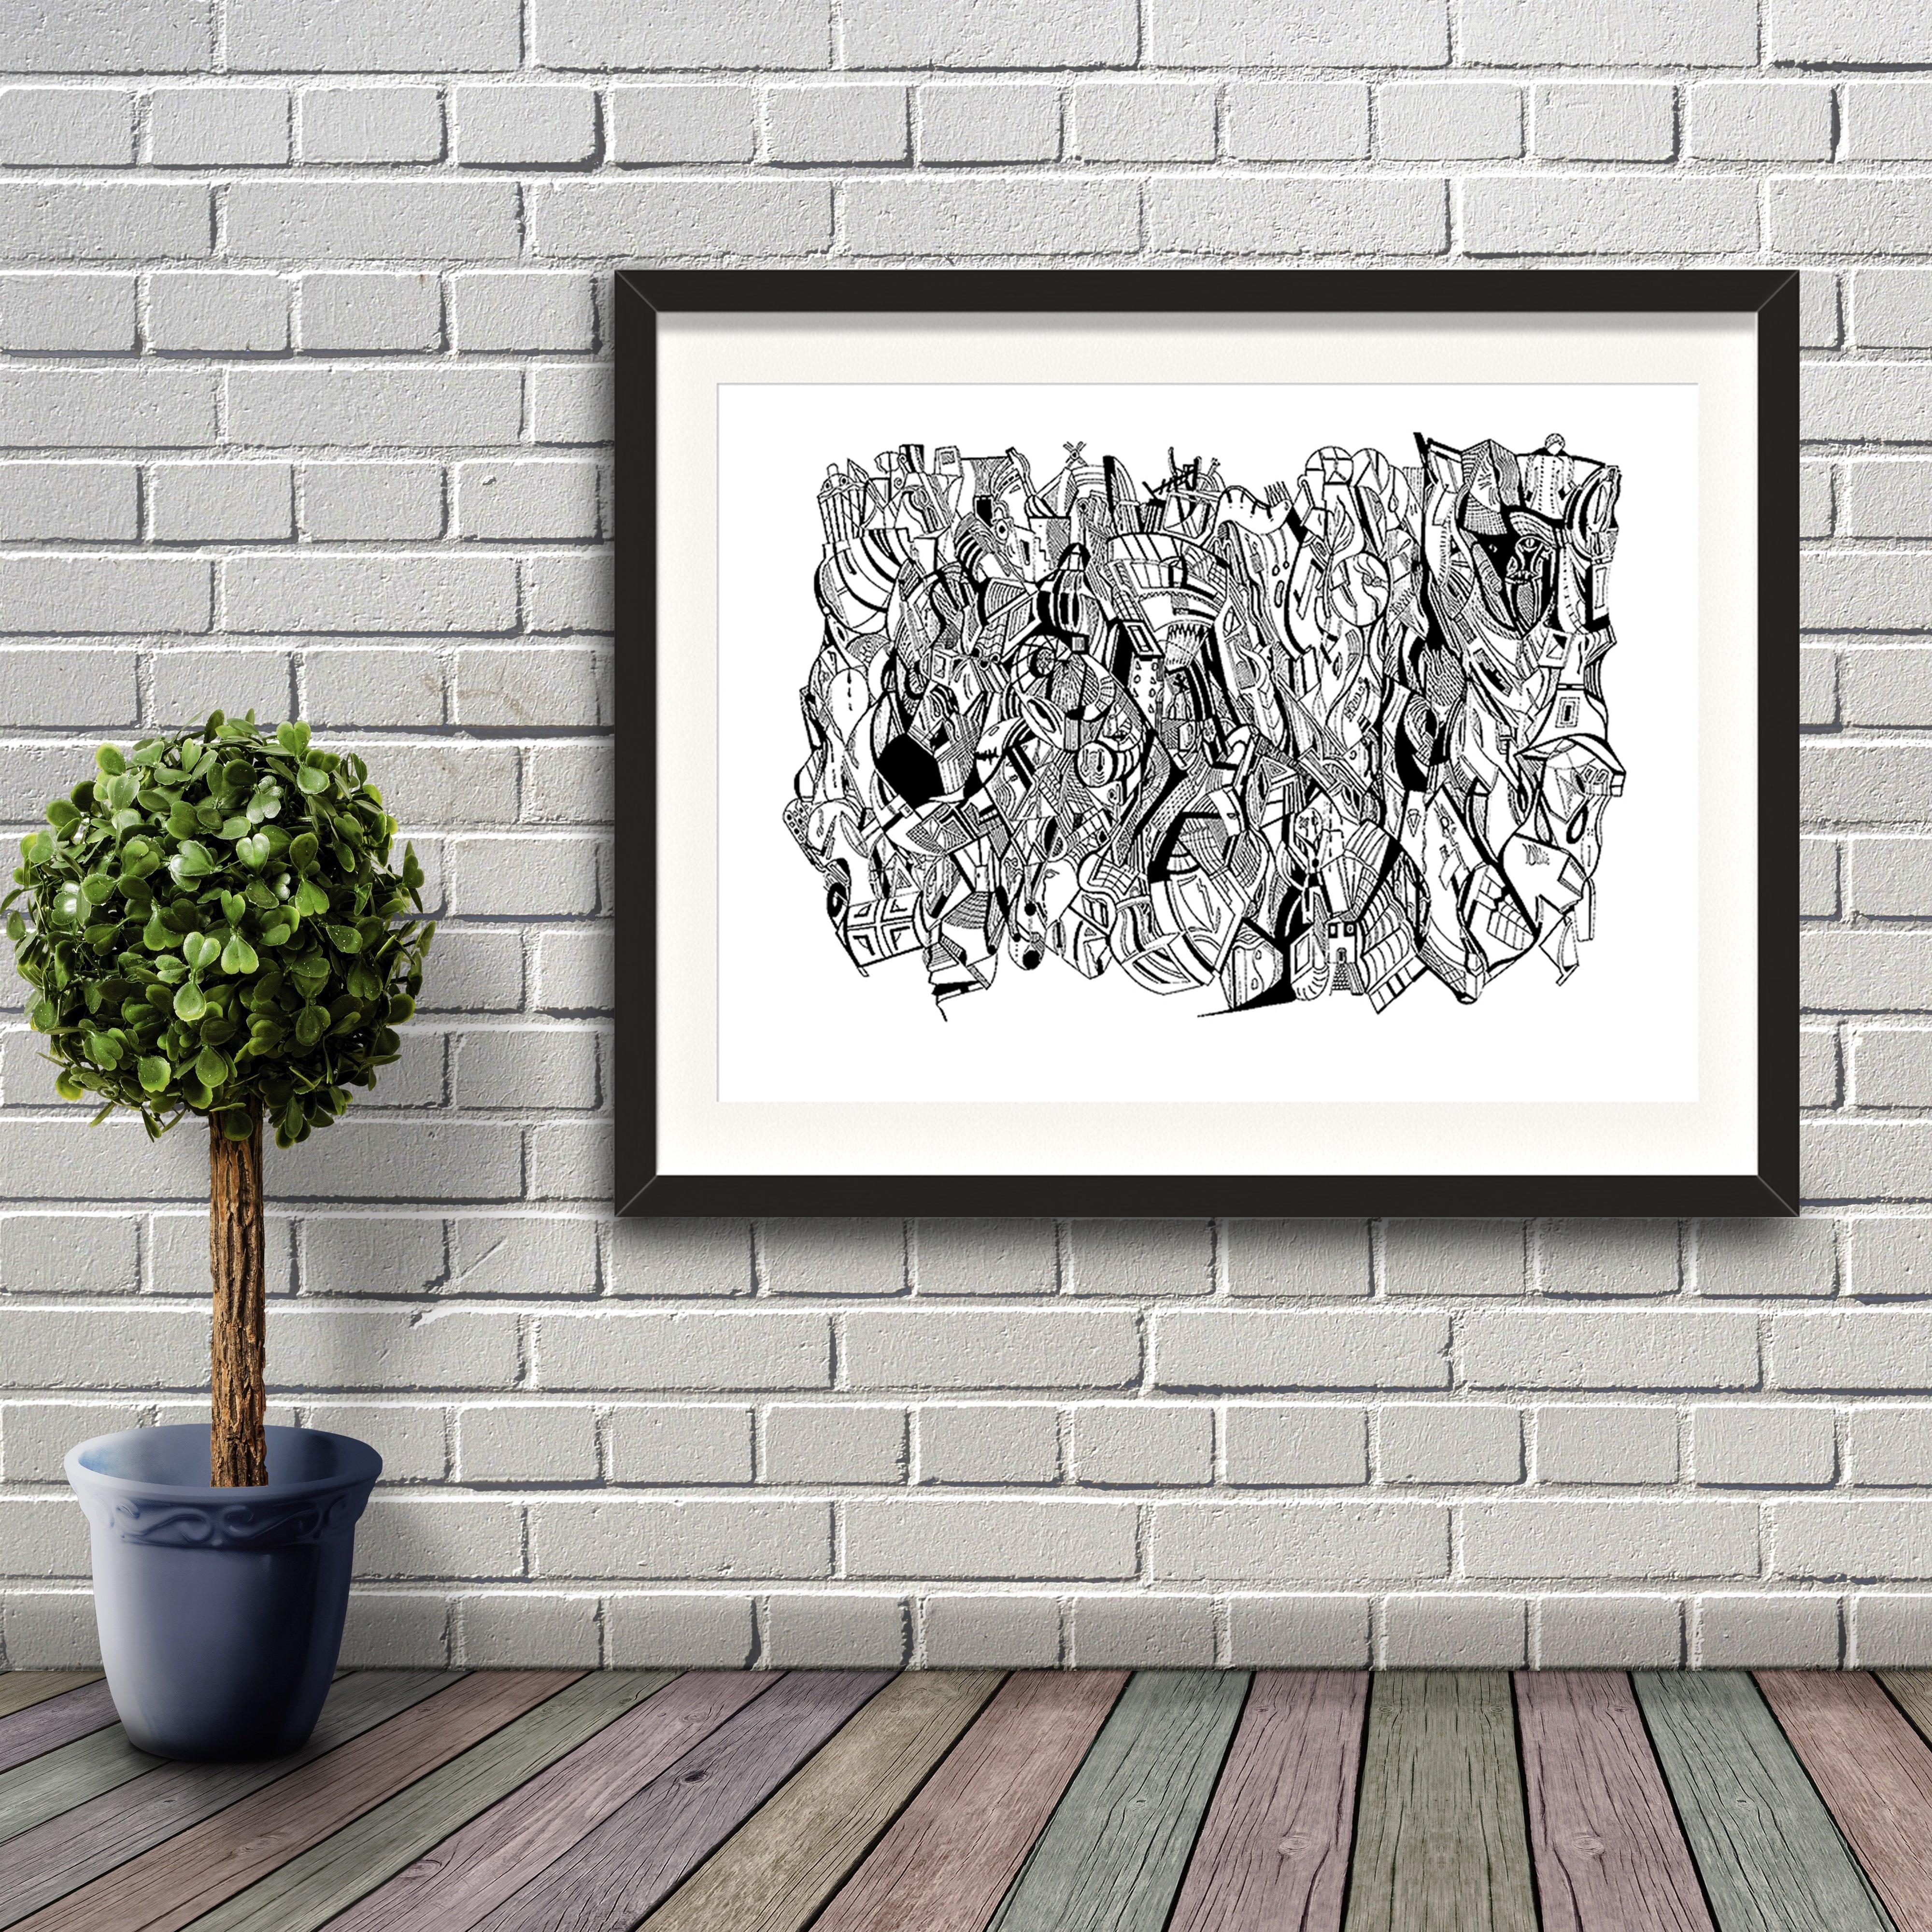 A fine art print from Jason Clarke titled It's Lonely At The Top drawn with a black Pentel pen. Artwork shown in a black frame hanging on a brick wall.